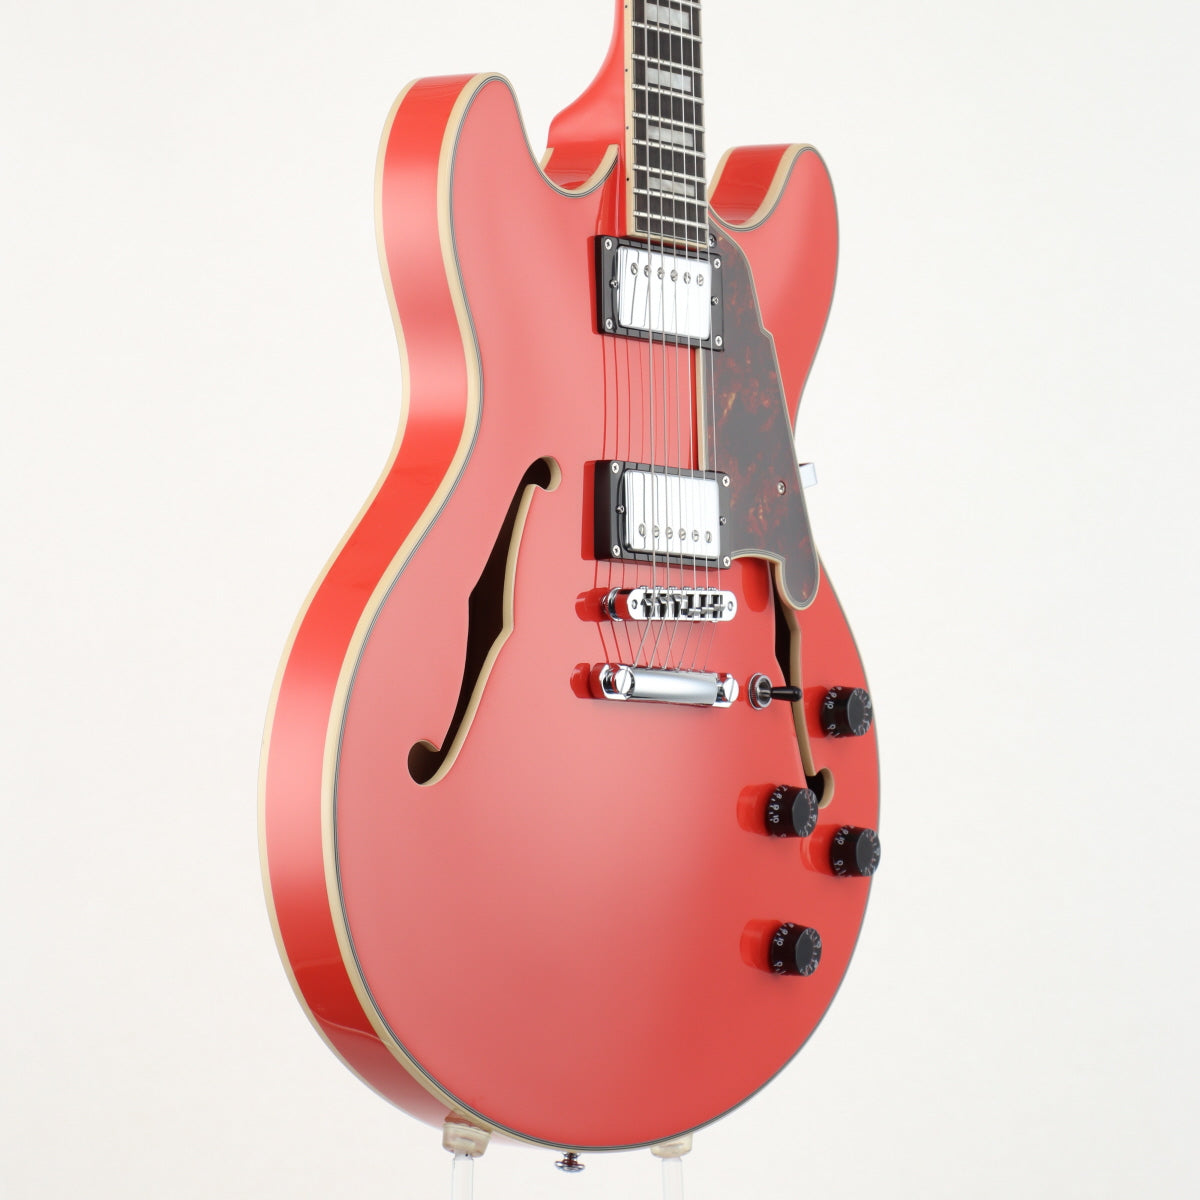 [SN KP222964] USED D'Angelico / Premier DC Fiesta Red [11]